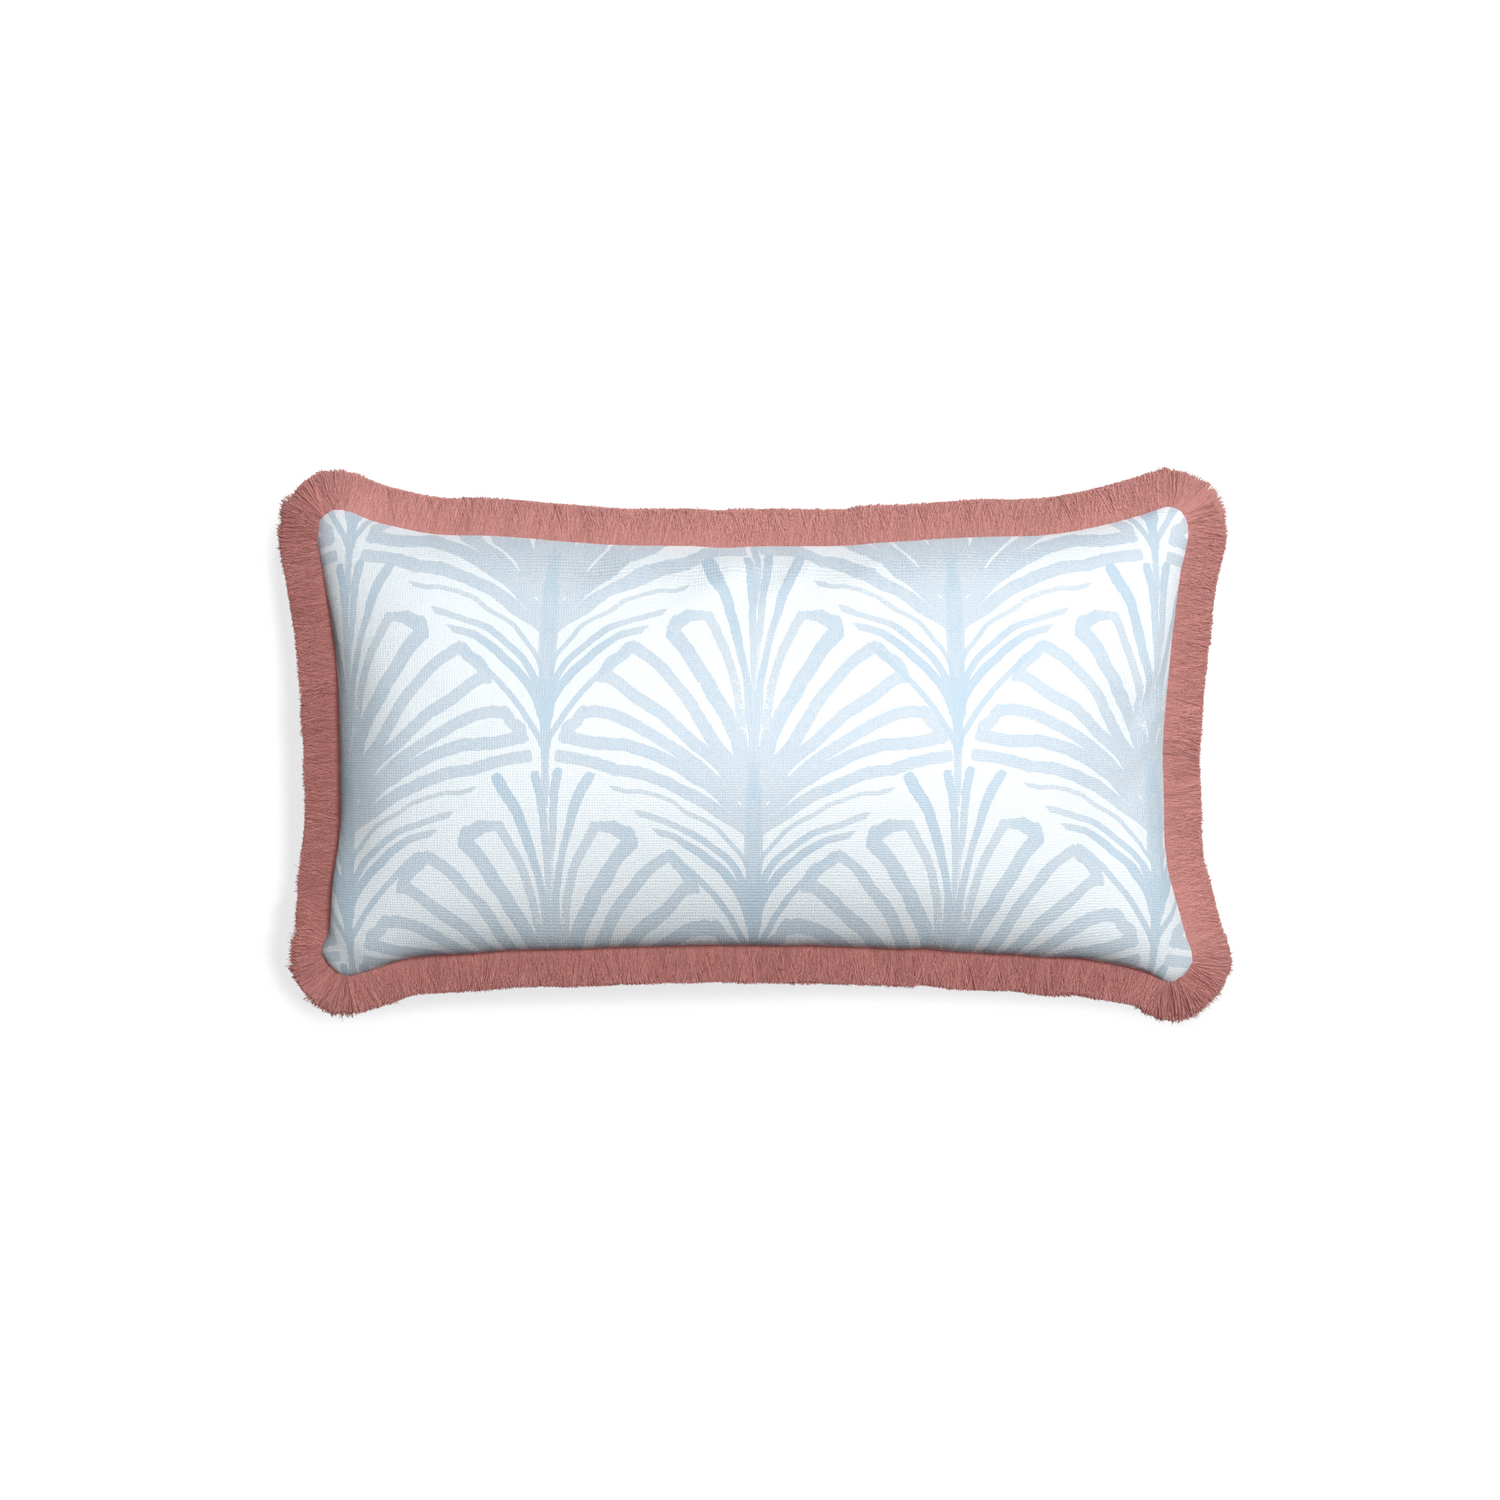 Petite-lumbar suzy sky custom sky blue palmpillow with d fringe on white background